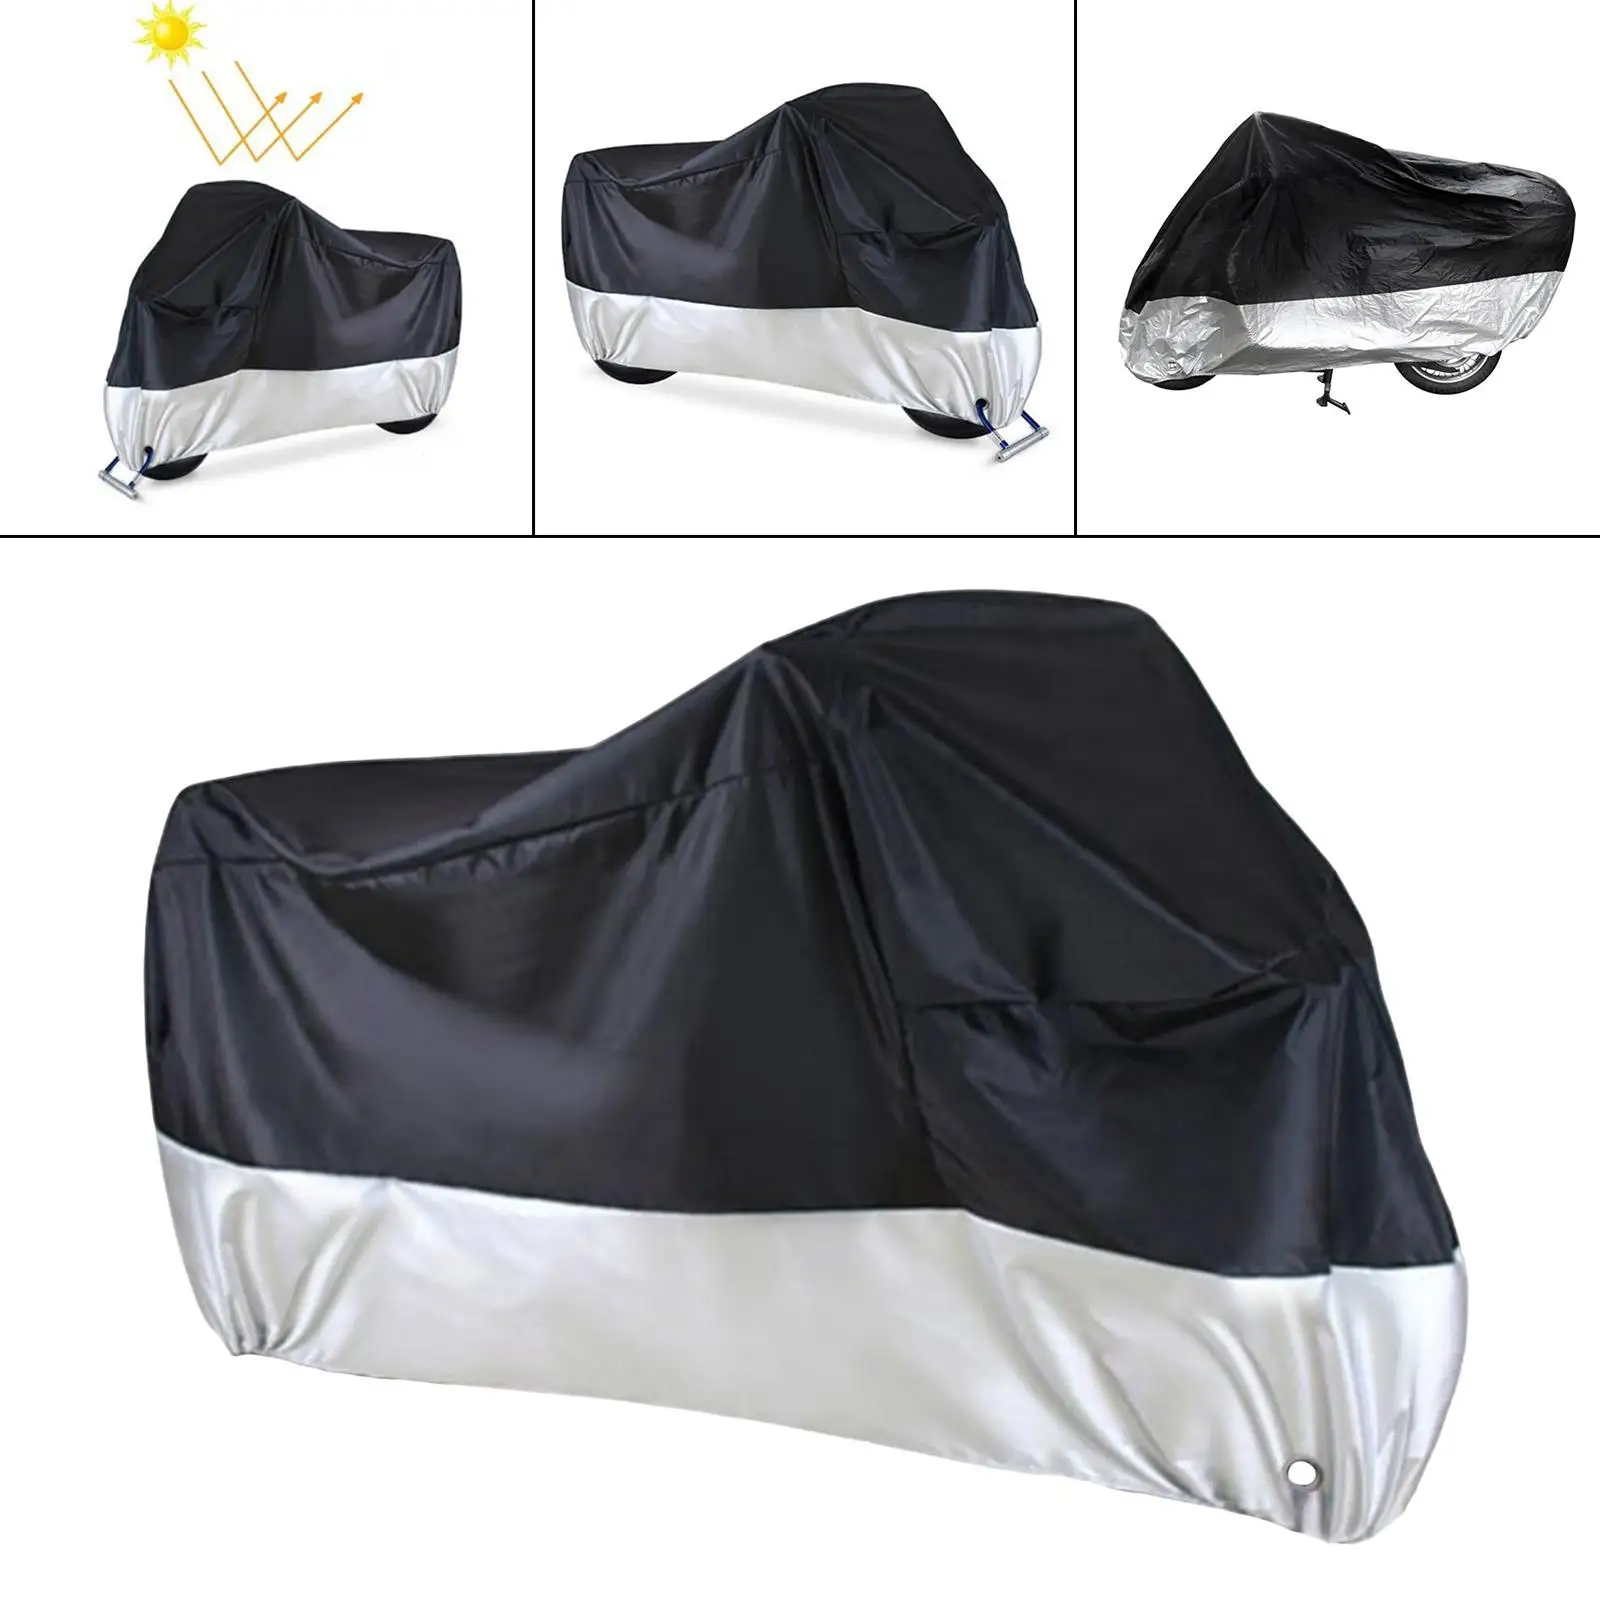 Motorcycle Cover Rain Snow UV Protection Lightweight Fit for Travel Ready